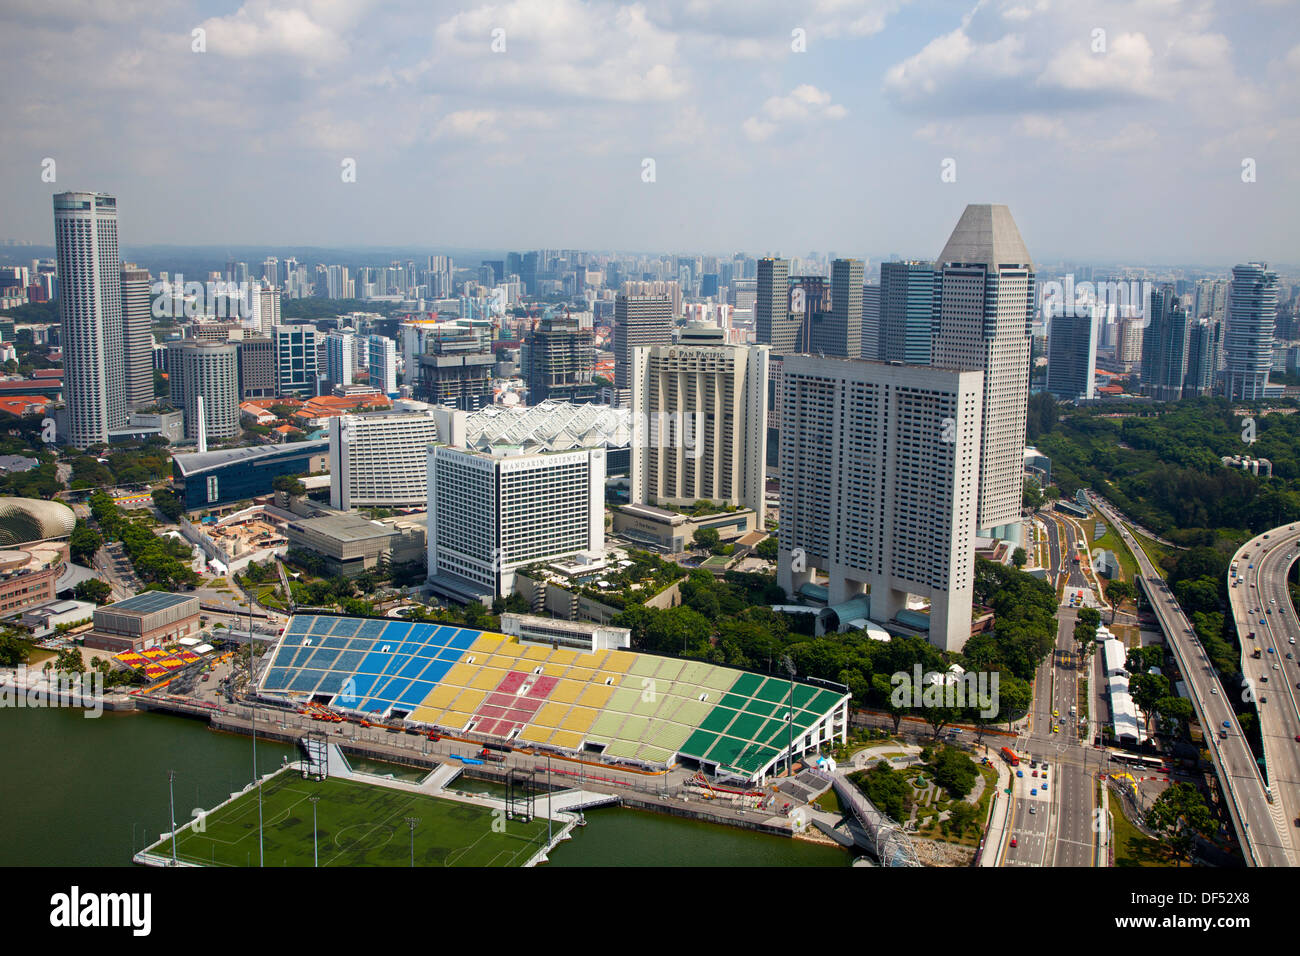 Marina Bay view above Singapore Asia skyscrapers soccer field buildings power influence elevated architecture money center town Stock Photo